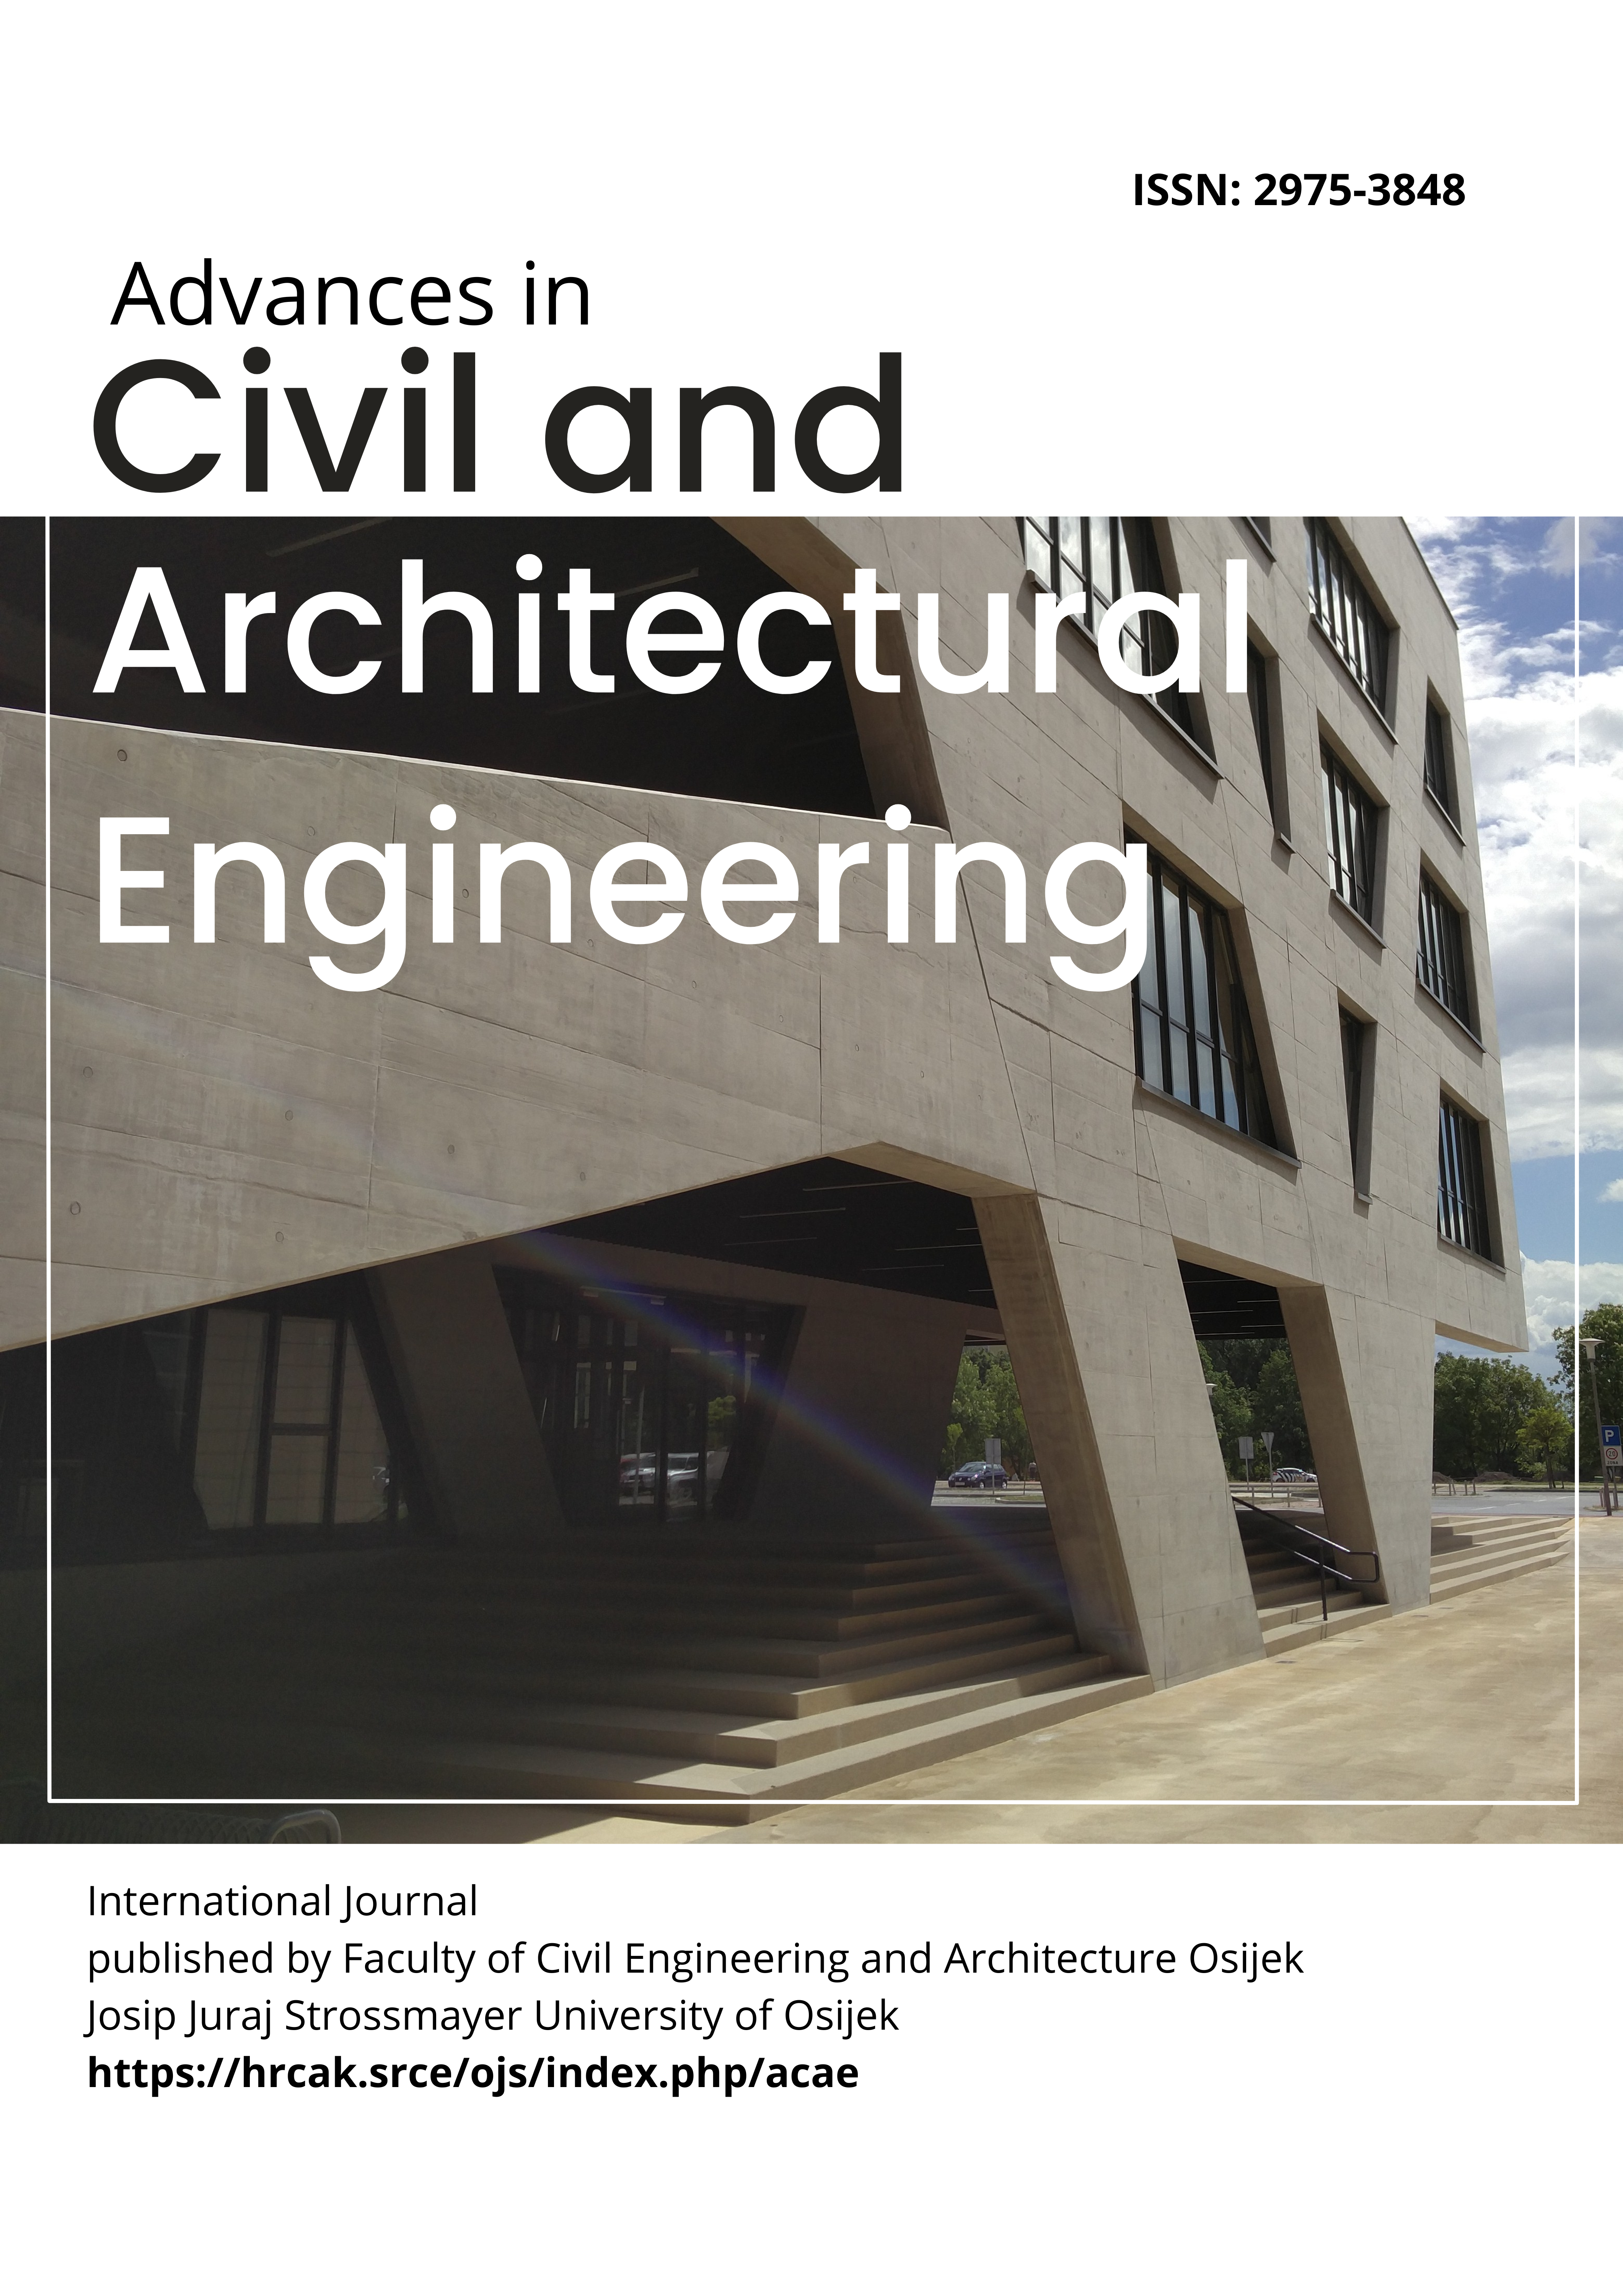 logo Advances in Civil and Architectural Engineering